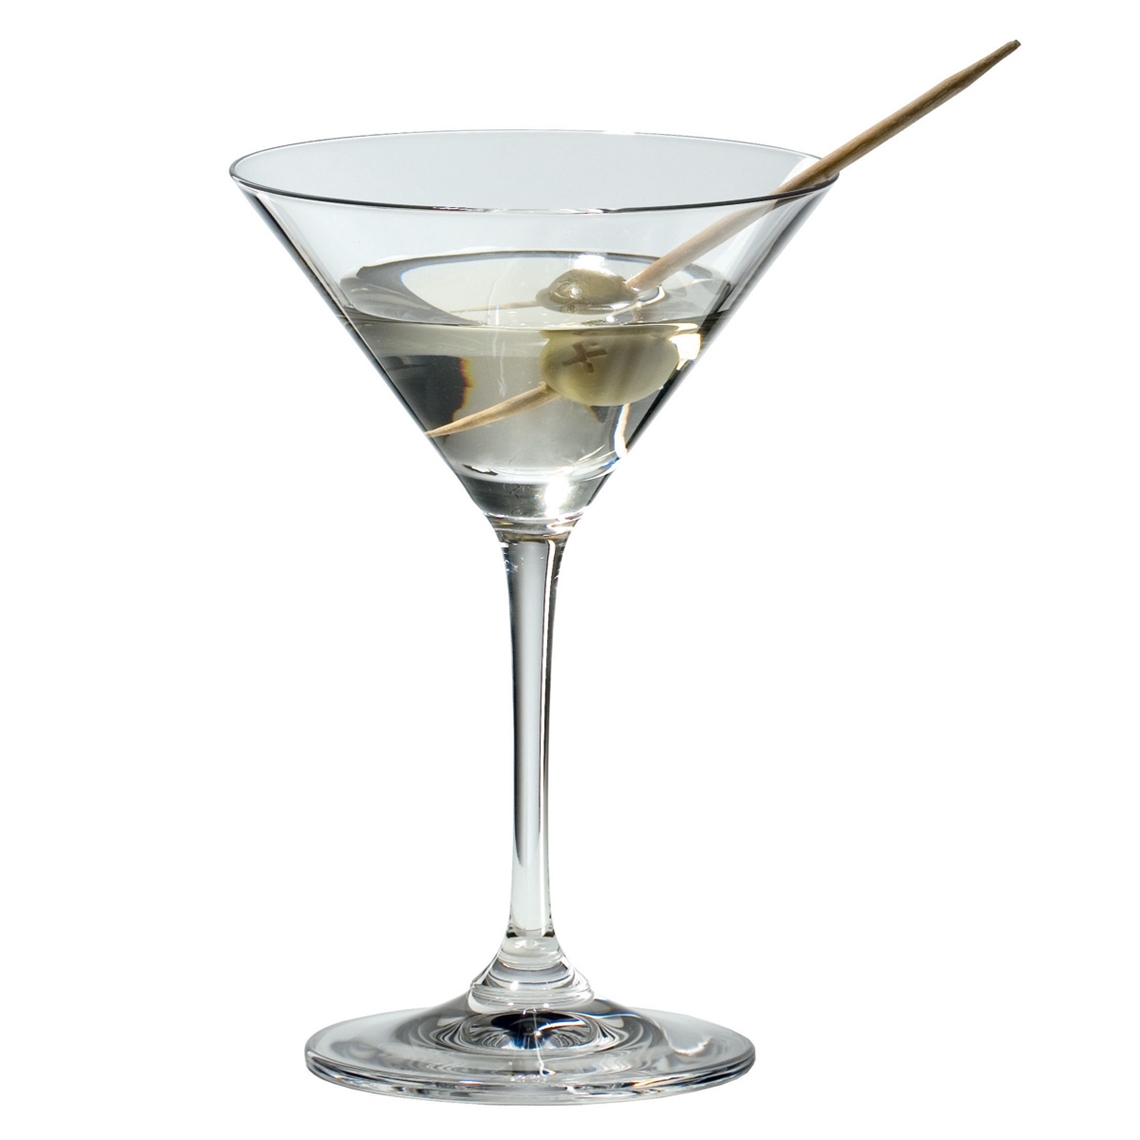 View more what makes iso wine tasting glasses so popular? from our Martini Glasses range